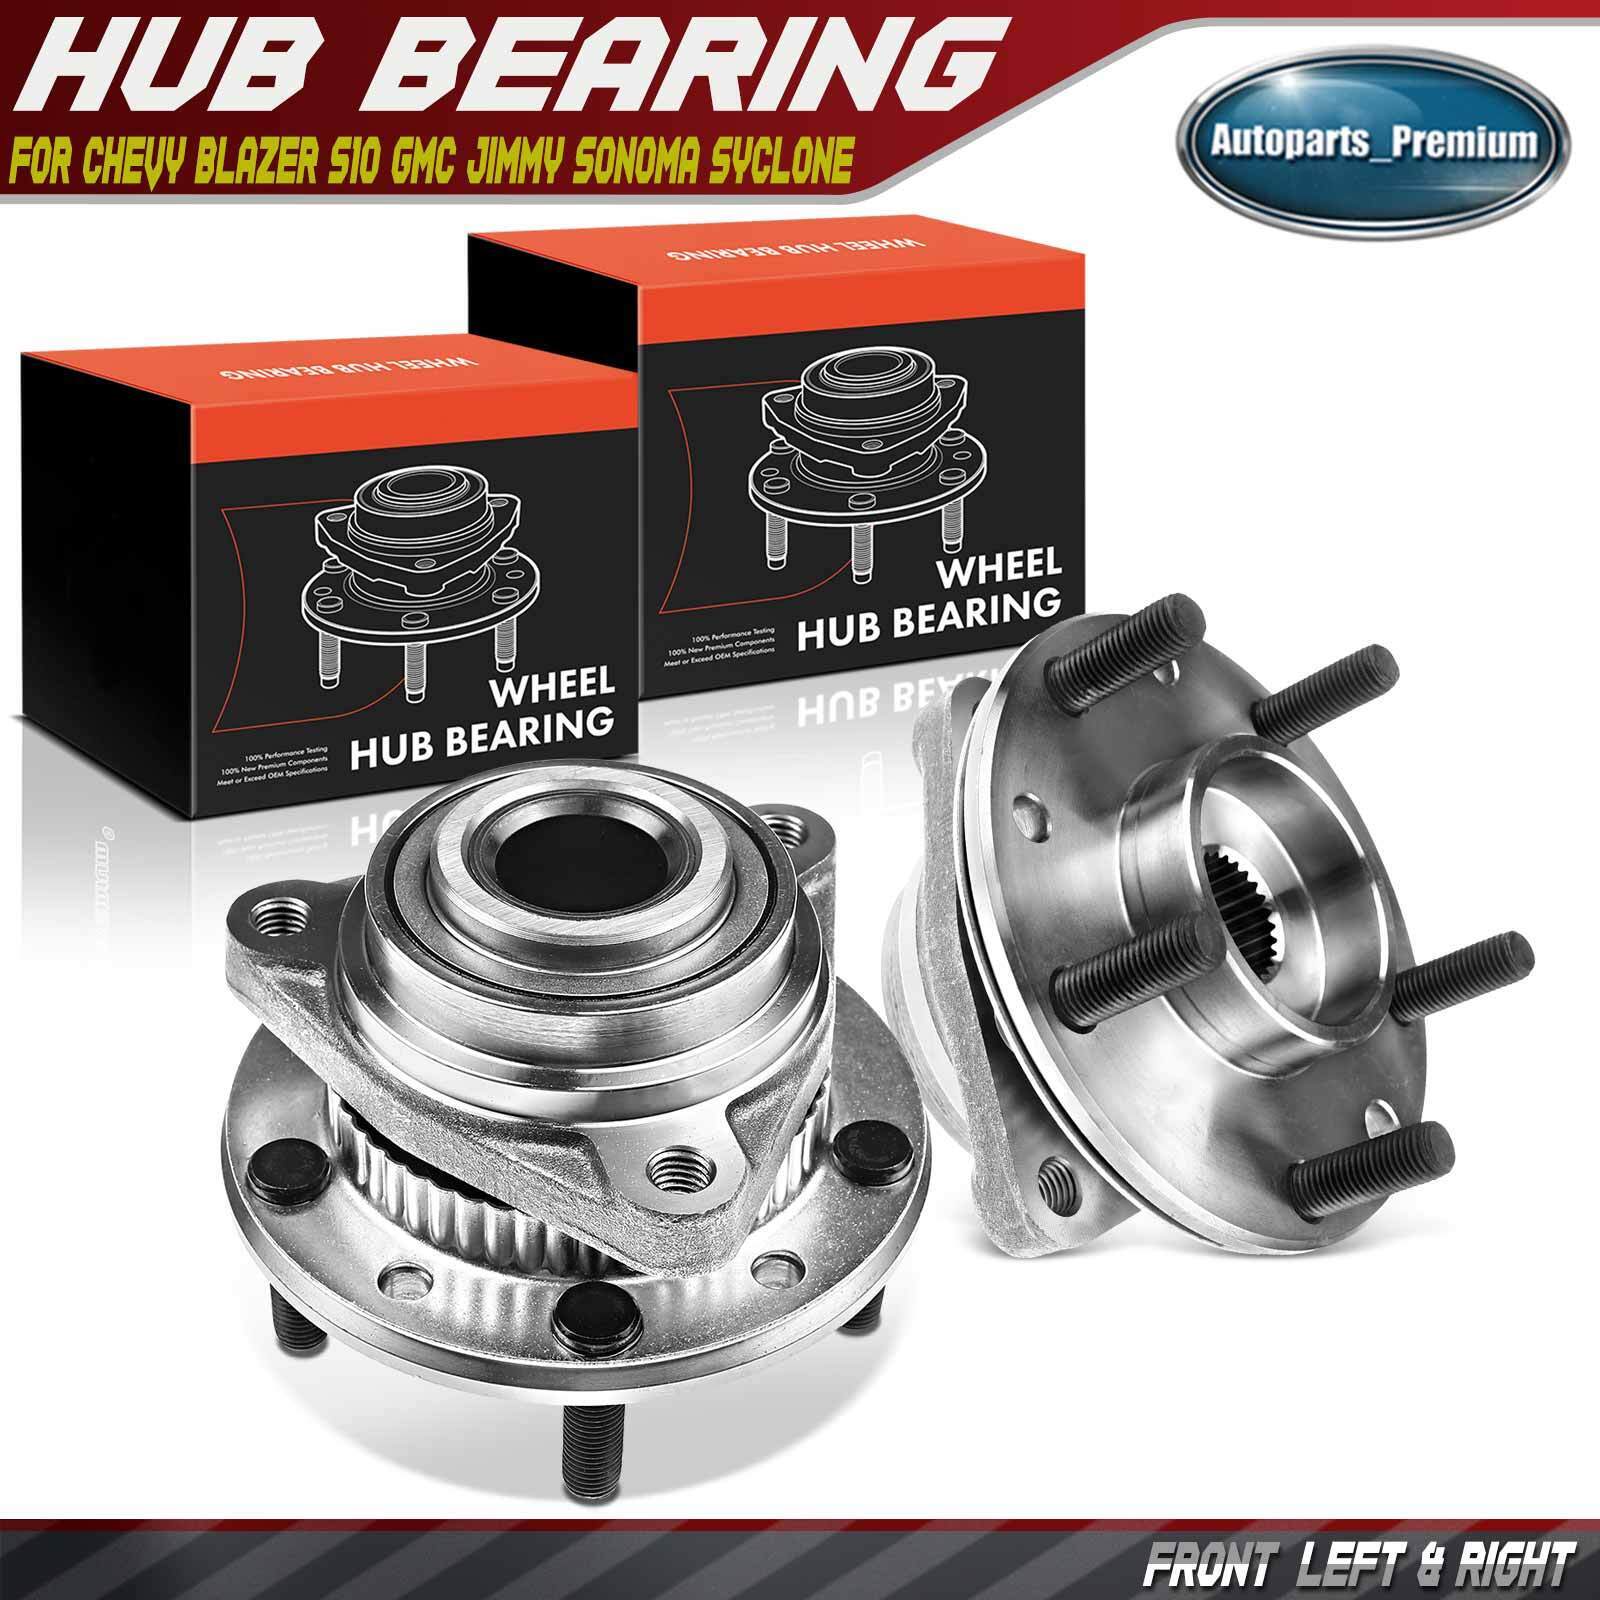 Front L & R Wheel Hub Bearing Assembly for Chevy S10 Blazer GMC S15 Sonoma Olds